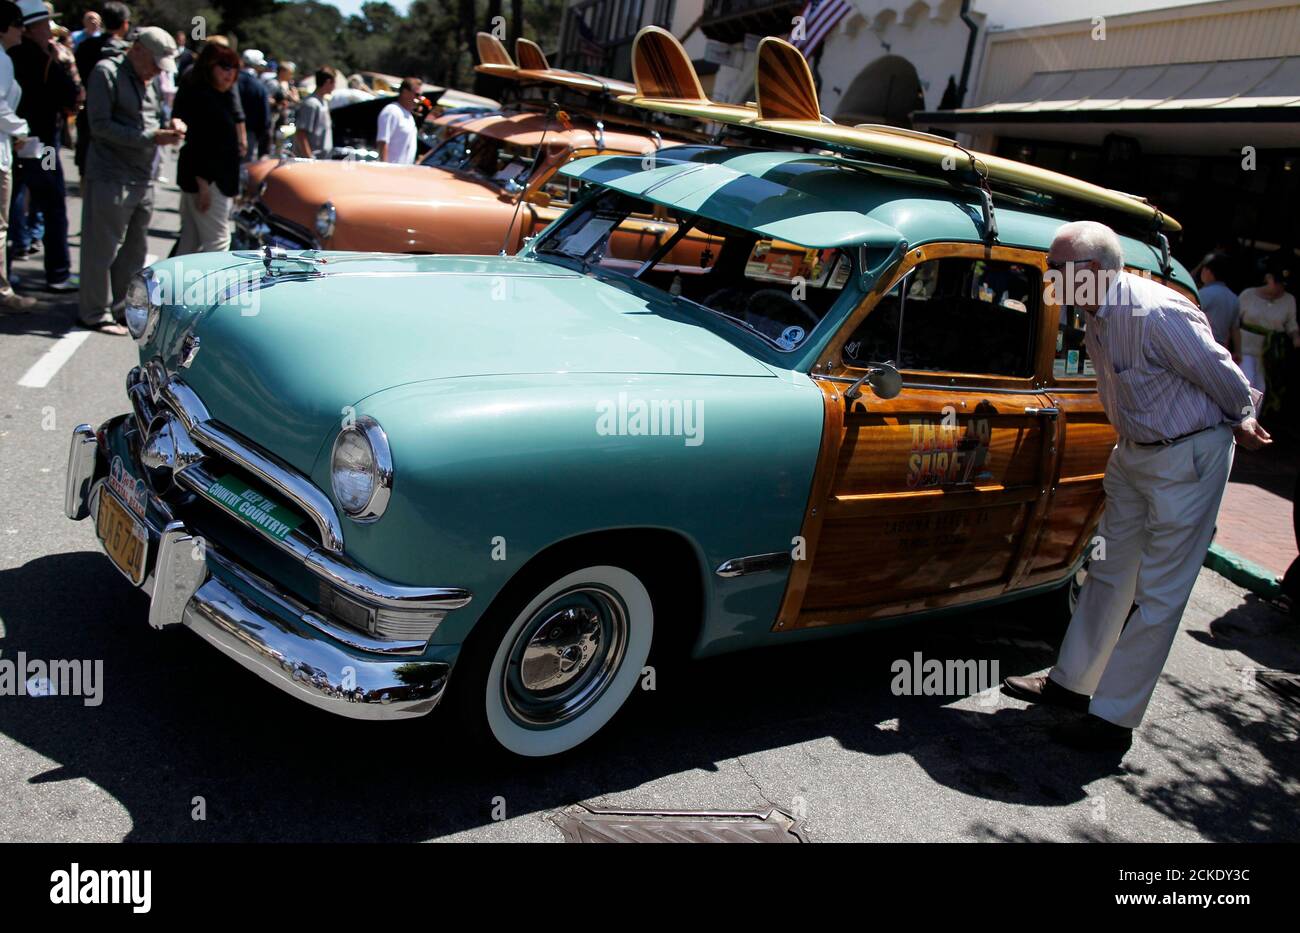 A 1950 Ford Country Squire Station Wagon is displayed during the Carmel-by-the-Sea Concours on the Avenue car show in Carmel, California, August 12, 2014. The event is held in conjunction with the Pebble Beach Concours d'Elegance. REUTERS/Michael Fiala (UNITED STATES - Tags: SOCIETY TRANSPORT) Stock Photo